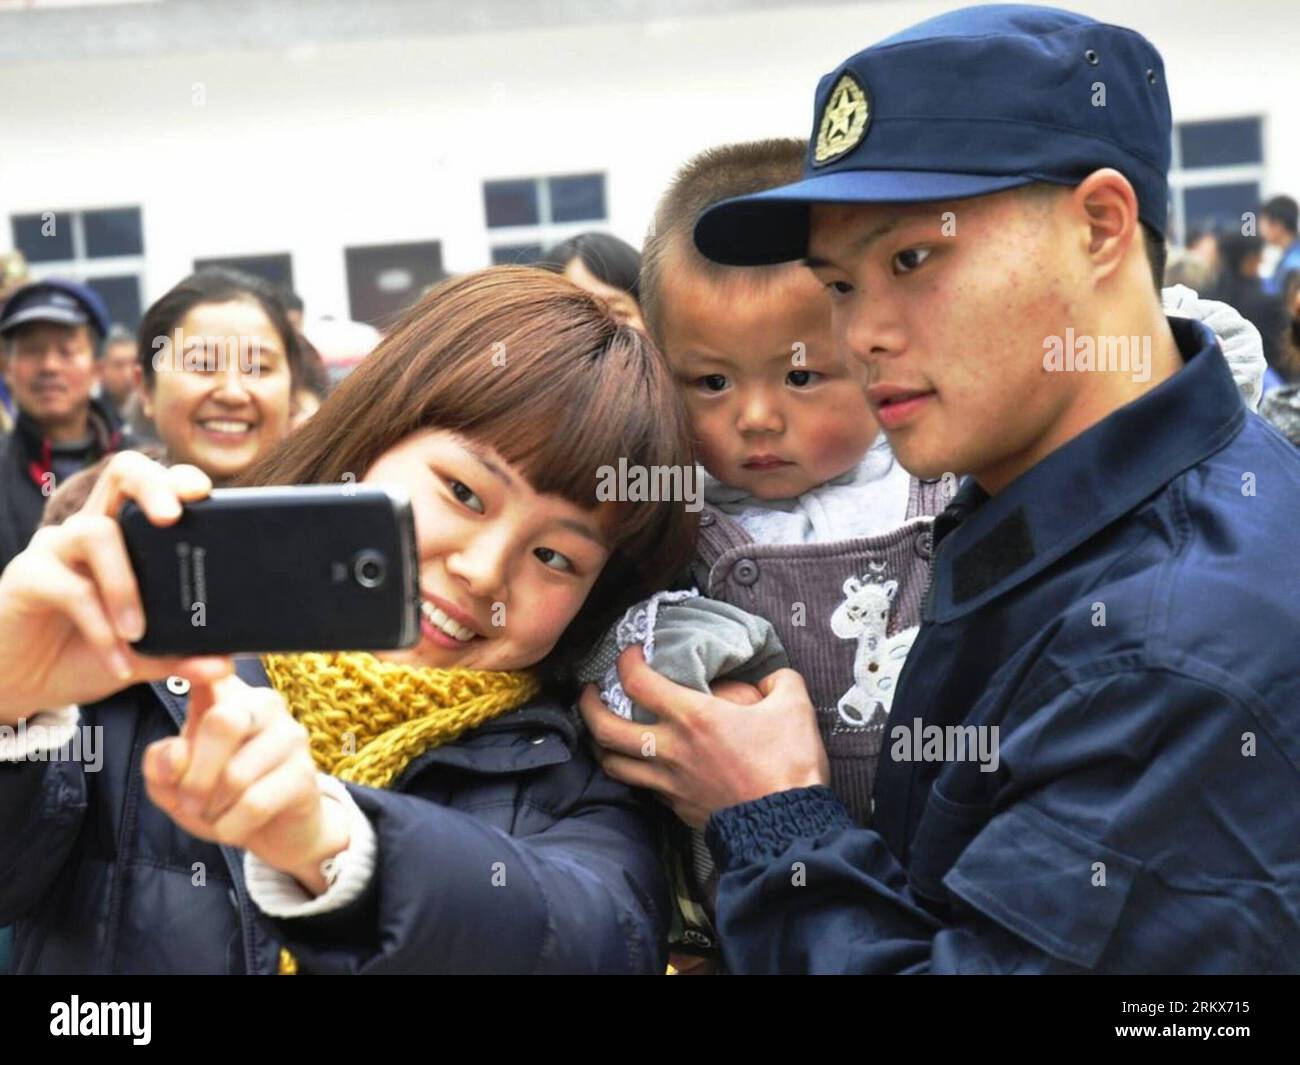 Bildnummer: 58903898  Datum: 10.12.2012  Copyright: imago/Xinhua (121210) -- HANZHONG, Dec. 10, 2012 (Xinhua) -- A newly recruited soldier of People s Liberation Army (PLA) poses for photos with his family before setting off in Chenggu County, northwest China s Shaanxi Province, Dec. 10, 2012. (Xinhua/Shan Qinghua) (zc) CHINA-RECRUITS-SETTING OFF (CN) PUBLICATIONxNOTxINxCHN Gesellschaft Militär Rekruten Einberufung Rekrutierung Soldat x0x xac 2012 quer      58903898 Date 10 12 2012 Copyright Imago XINHUA  Hanzhong DEC 10 2012 XINHUA a newly  Soldier of Celebrities S Liberation Army PLA Poses f Stock Photo